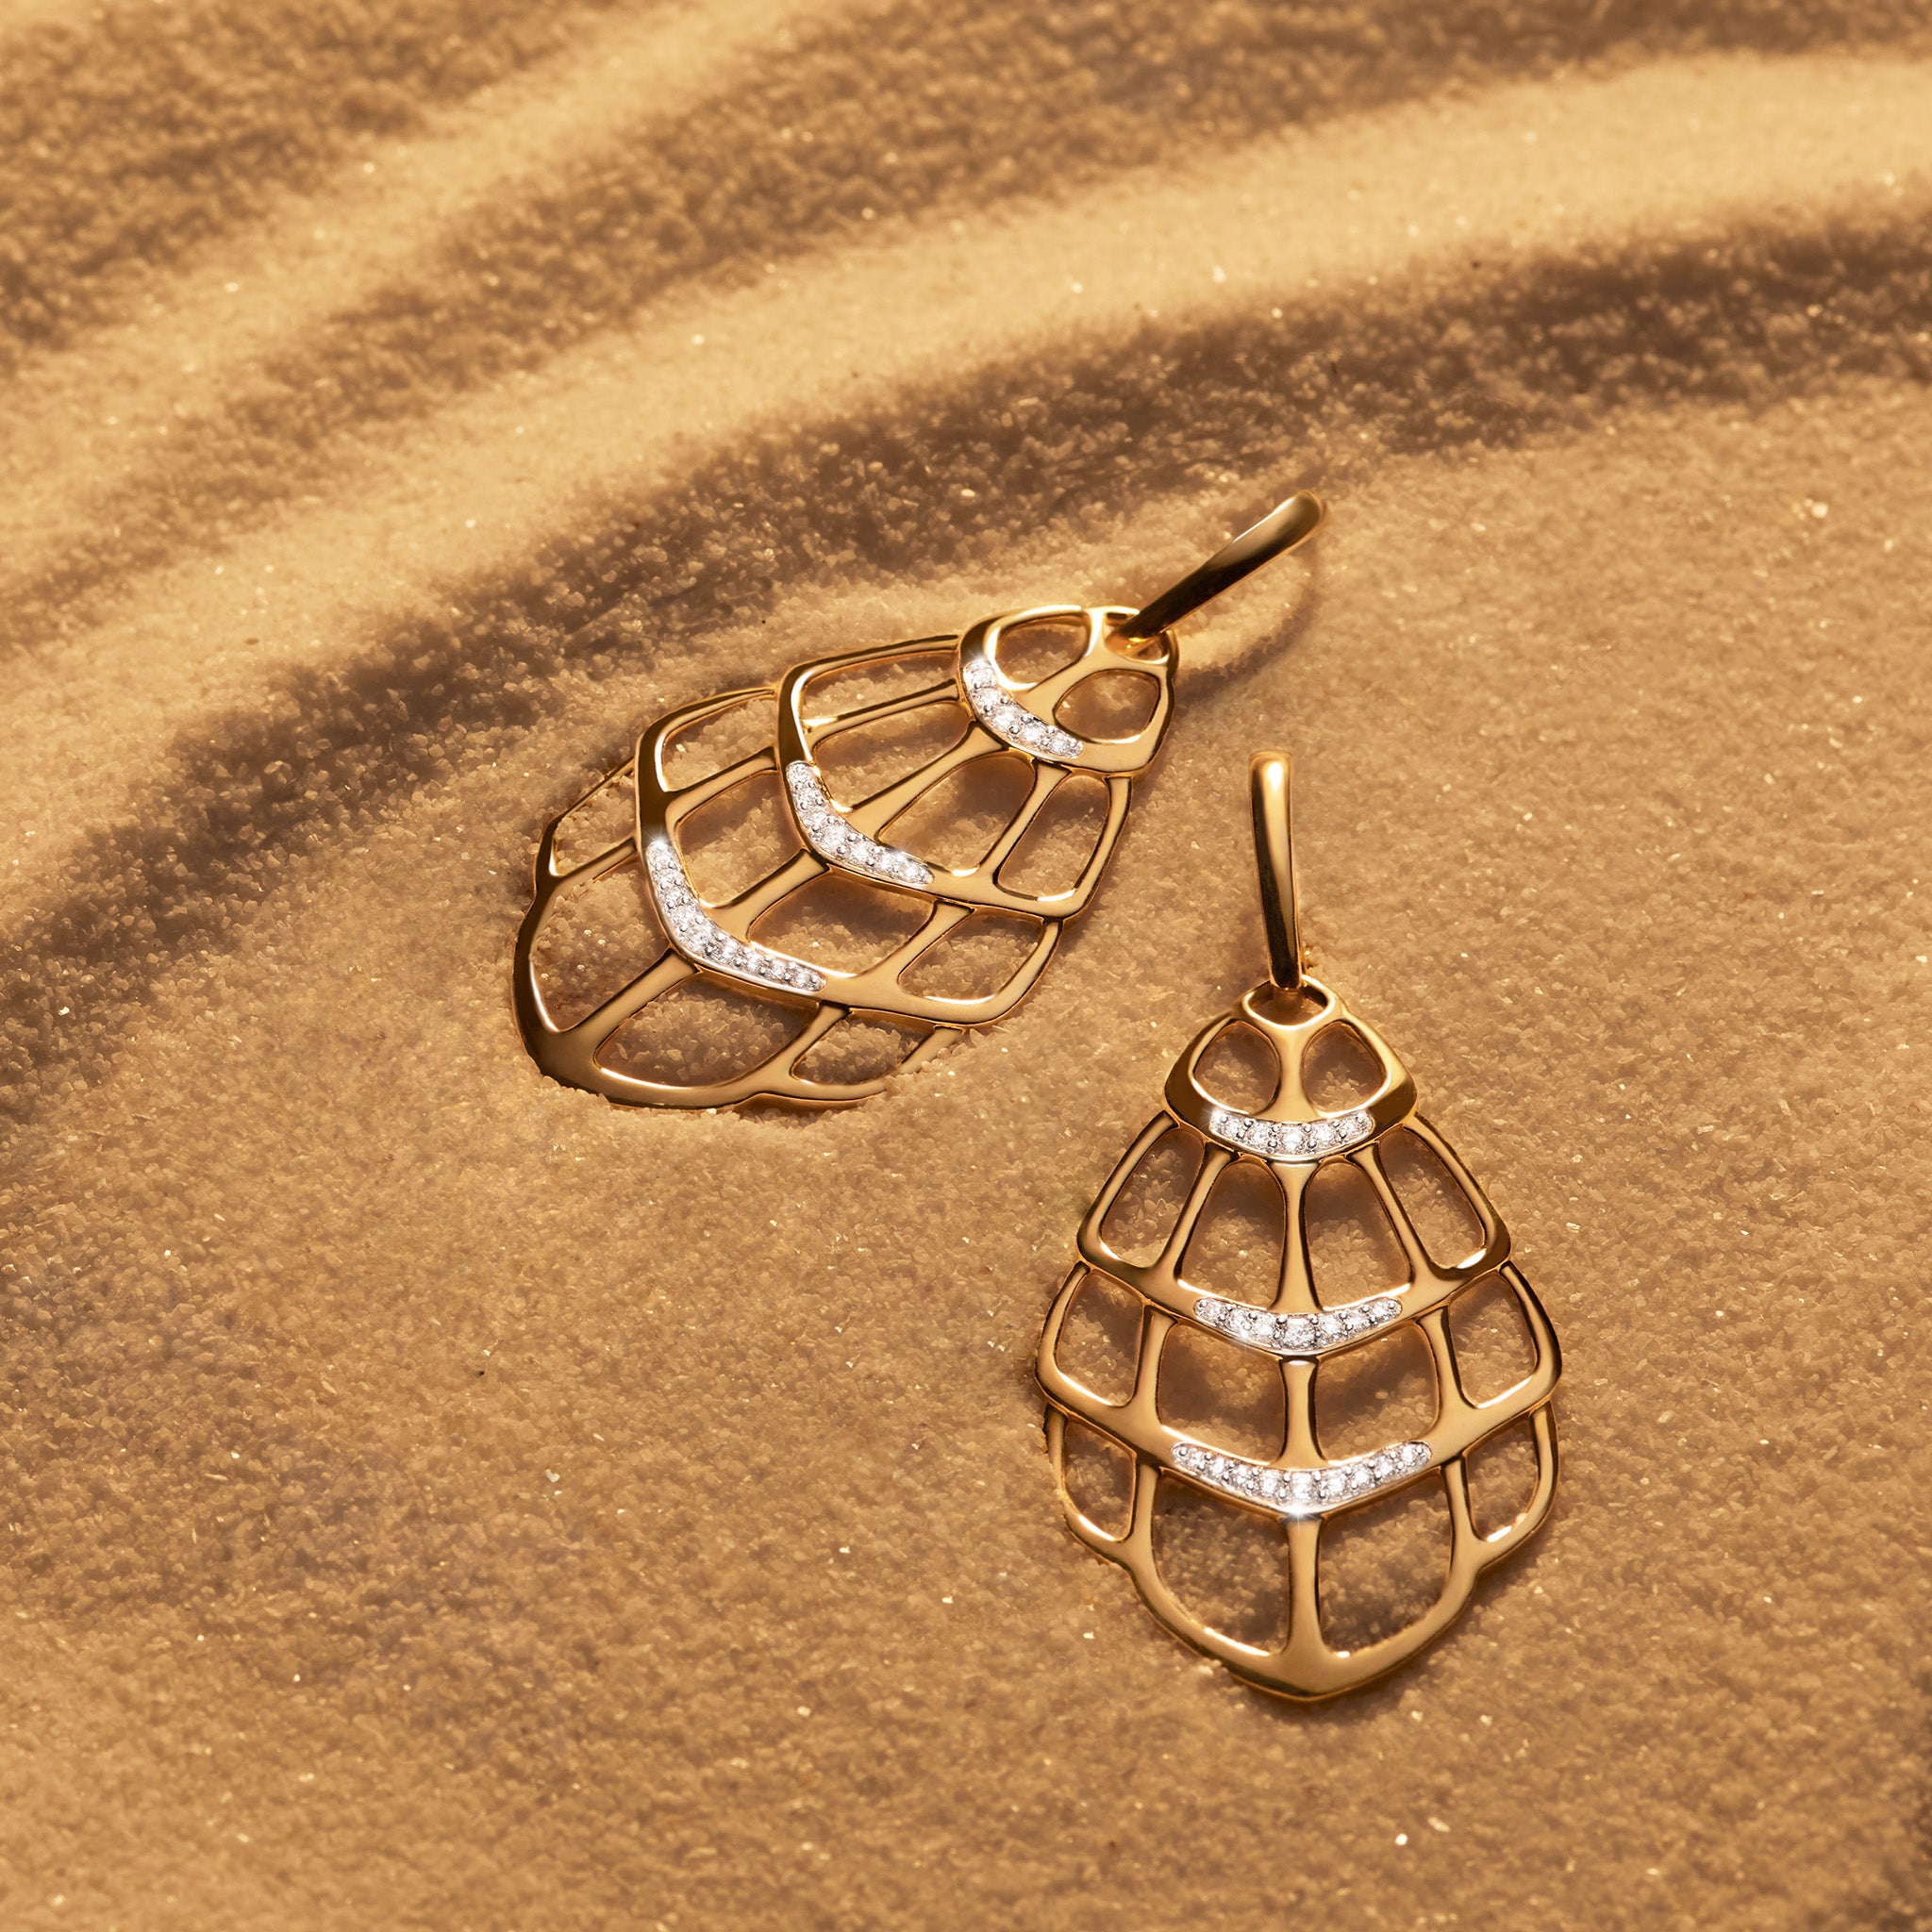 Selvaggia Drama Earrings with Diamonds in 14K